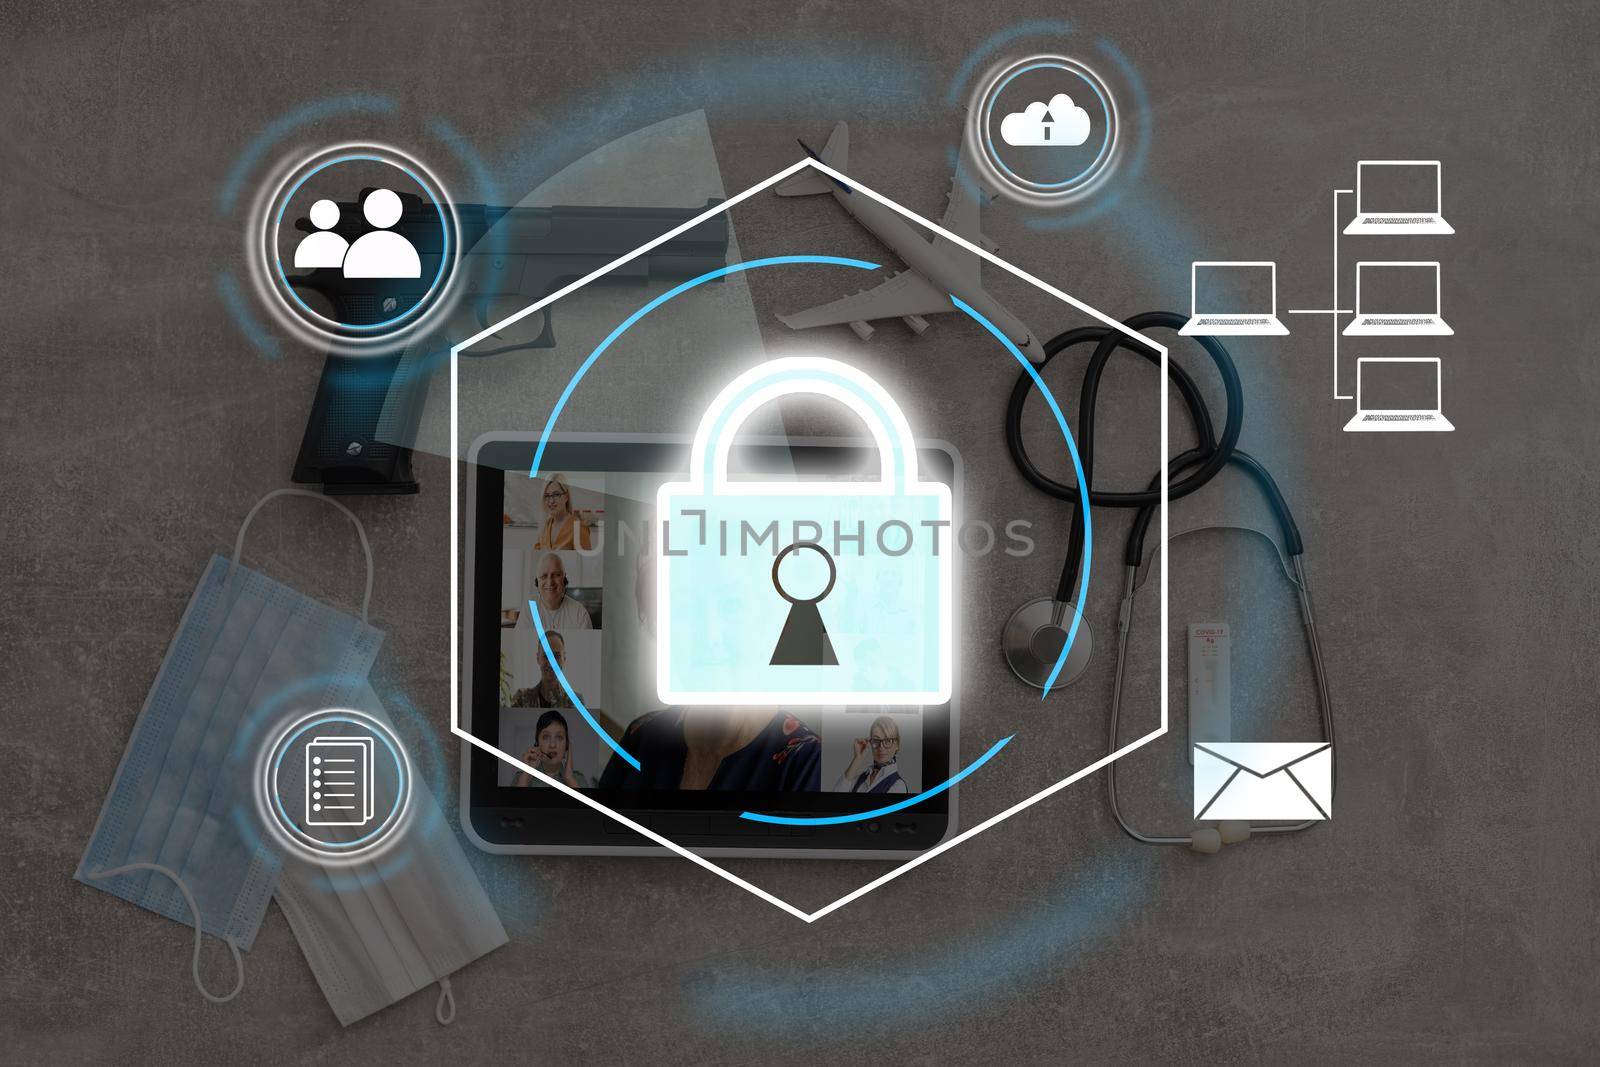 Digital padlock icon, cyber security network and data protection technology on virtual interface screen. Online internet authorized access against cyber attack.and business data privacy concept by Andelov13